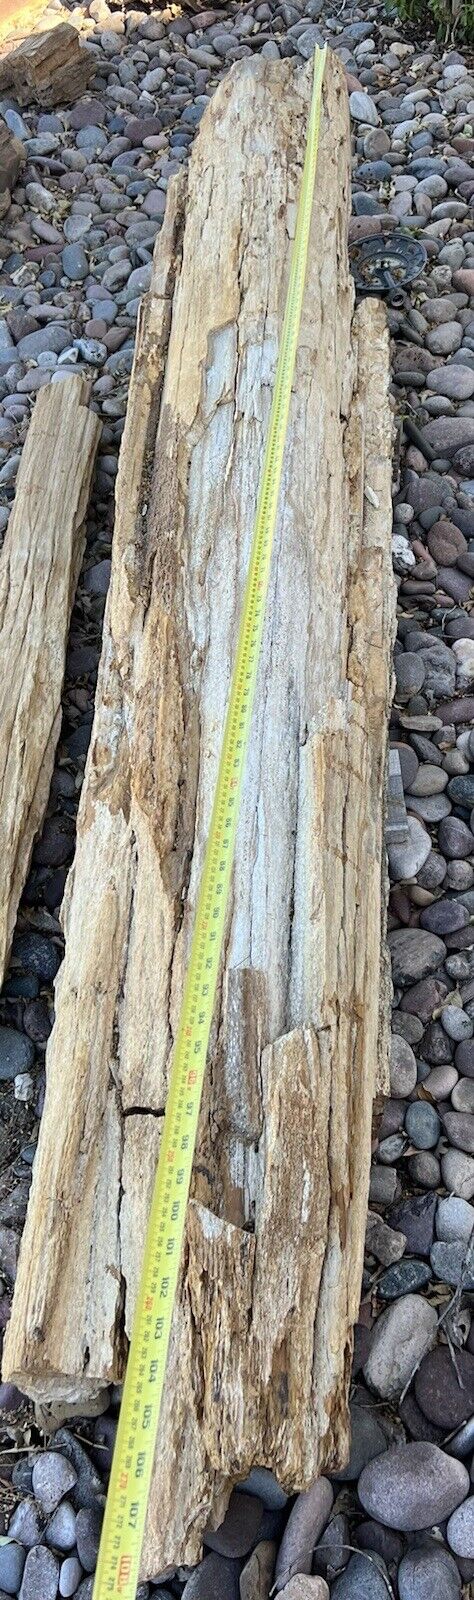 VERY LARGE PETRIFIED LOG - Almost 9’ Long